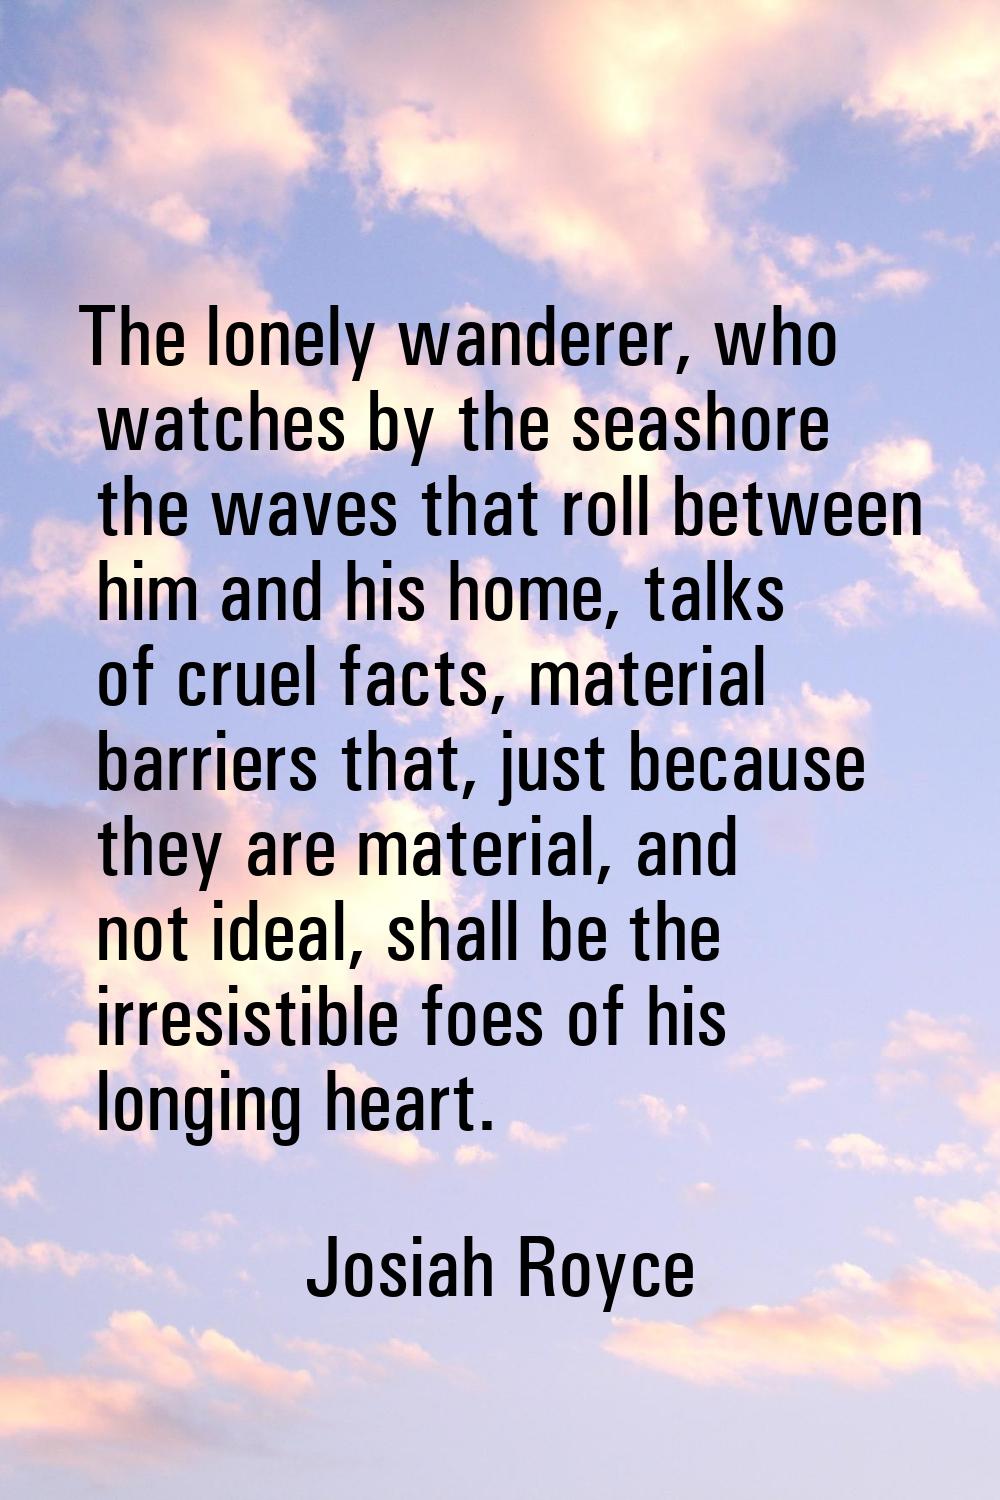 The lonely wanderer, who watches by the seashore the waves that roll between him and his home, talk